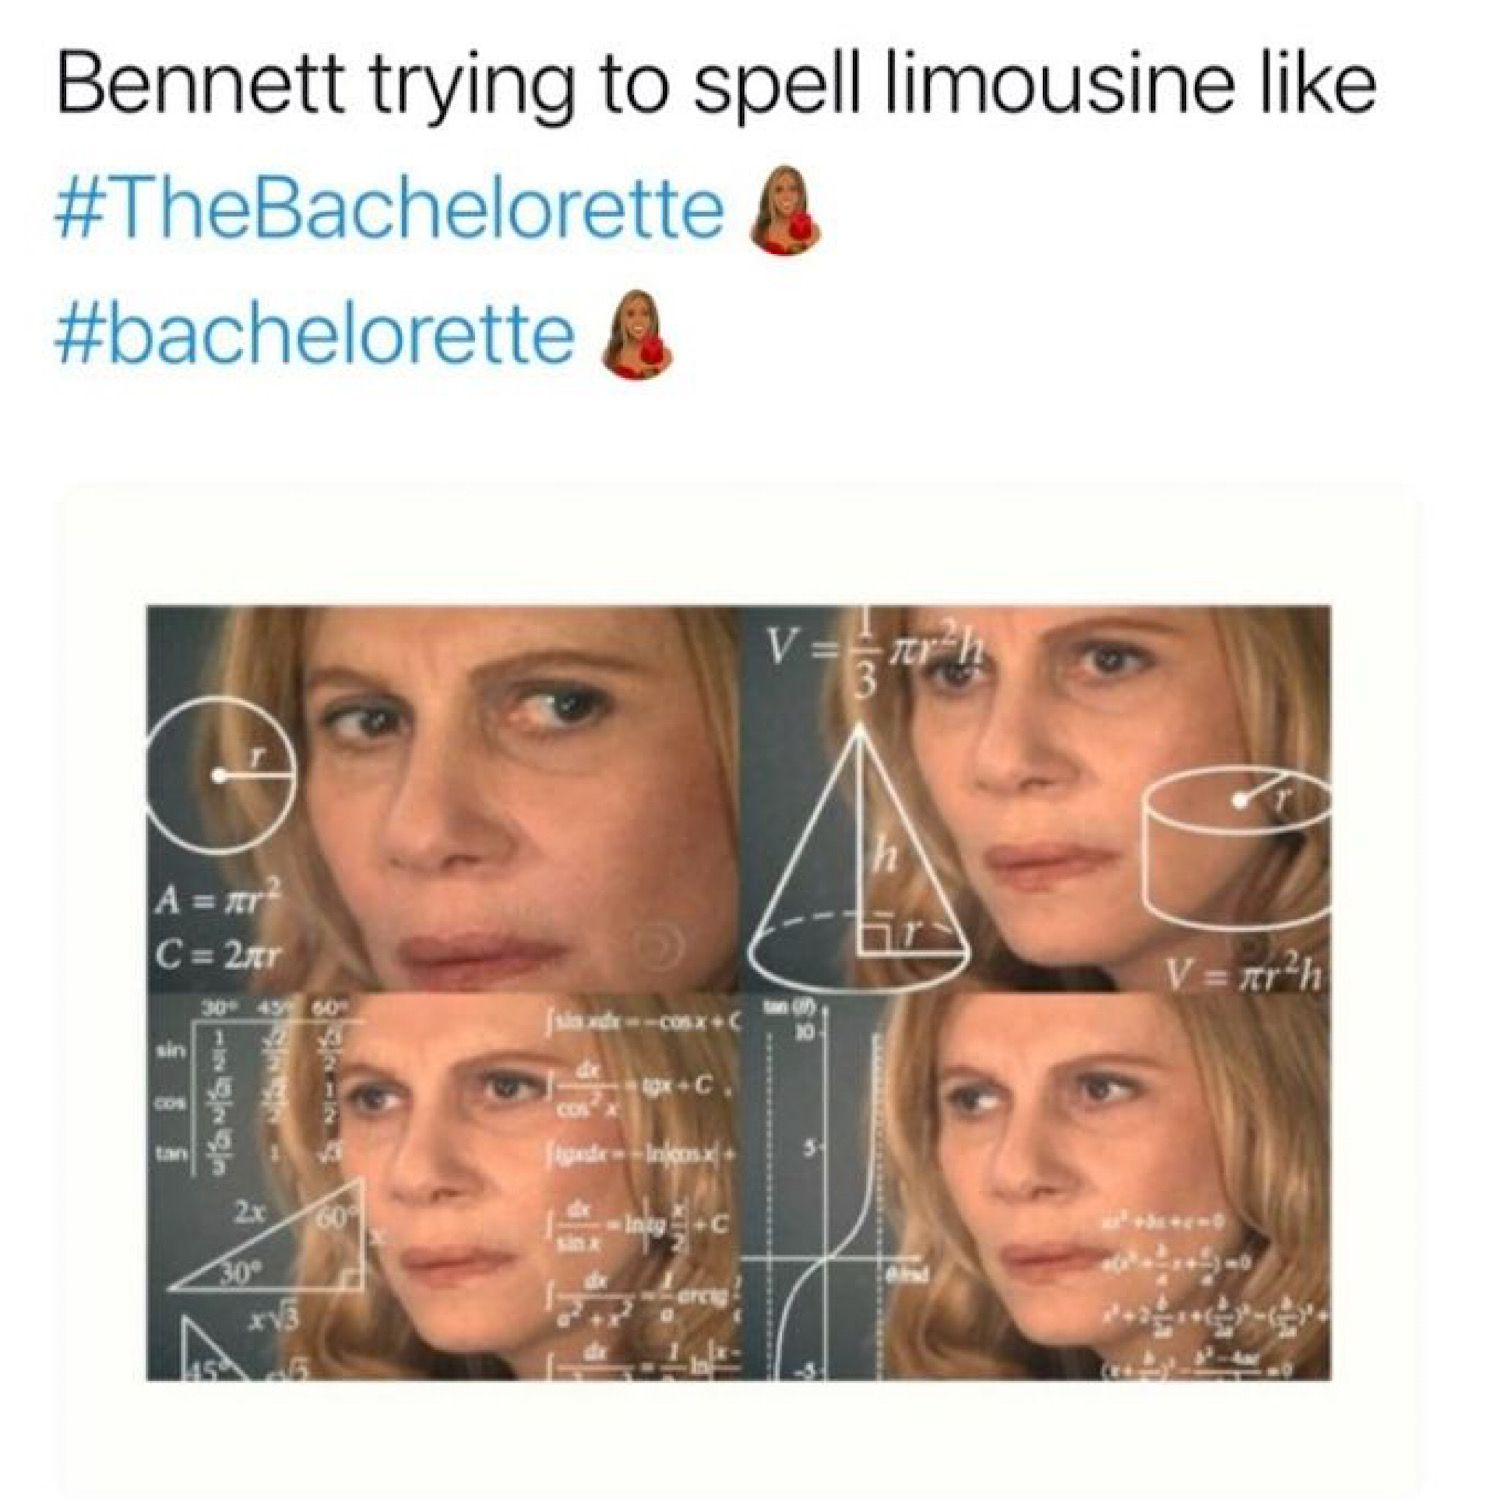 A woman puzzles over a math problem in a meme about Bennett on The Bachelorette